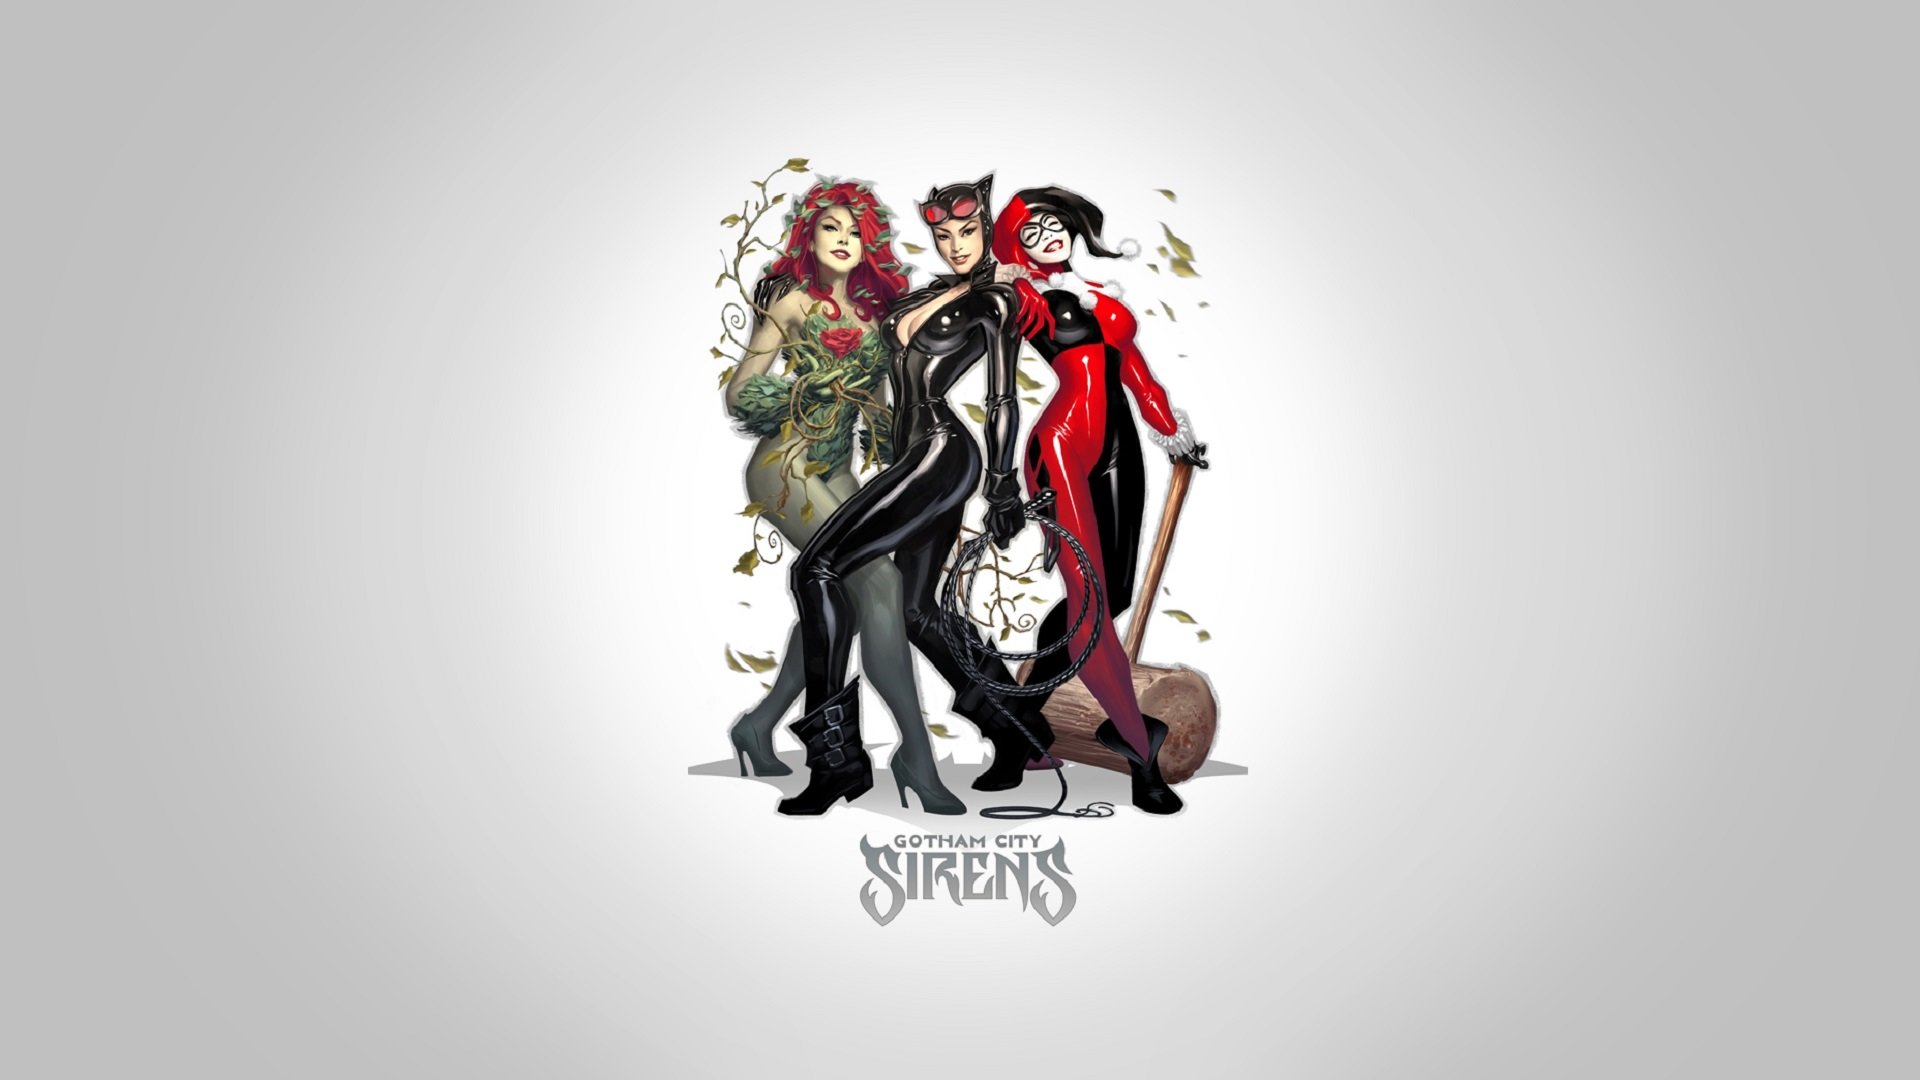 Best Gotham City Sirens wallpaper ID:43375 for High Resolution hd 1080p PC